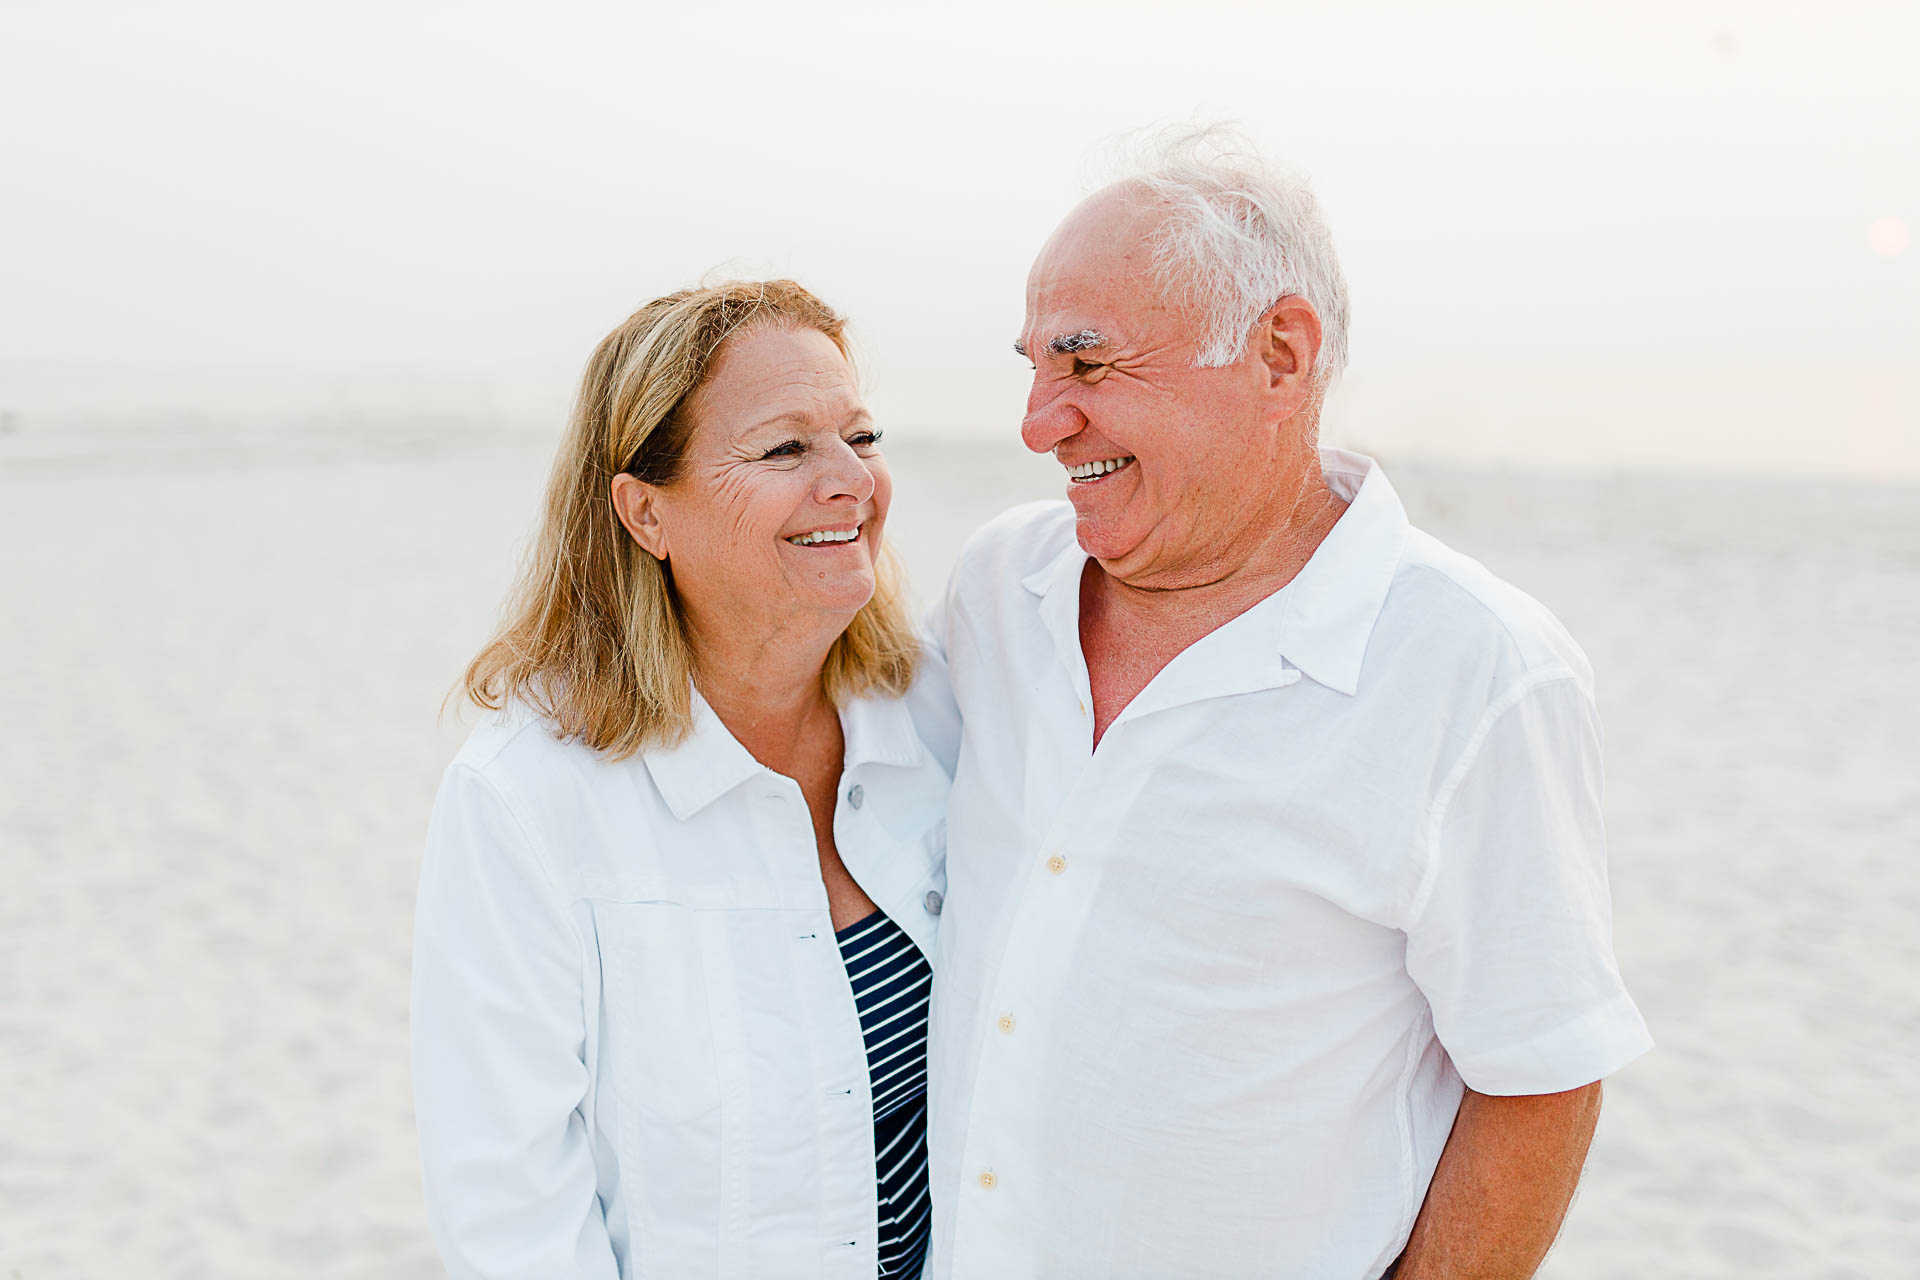 Photo by Cape Cod Family Photographer Christina Runnals | Grandparents looking at each other adoringly on beach